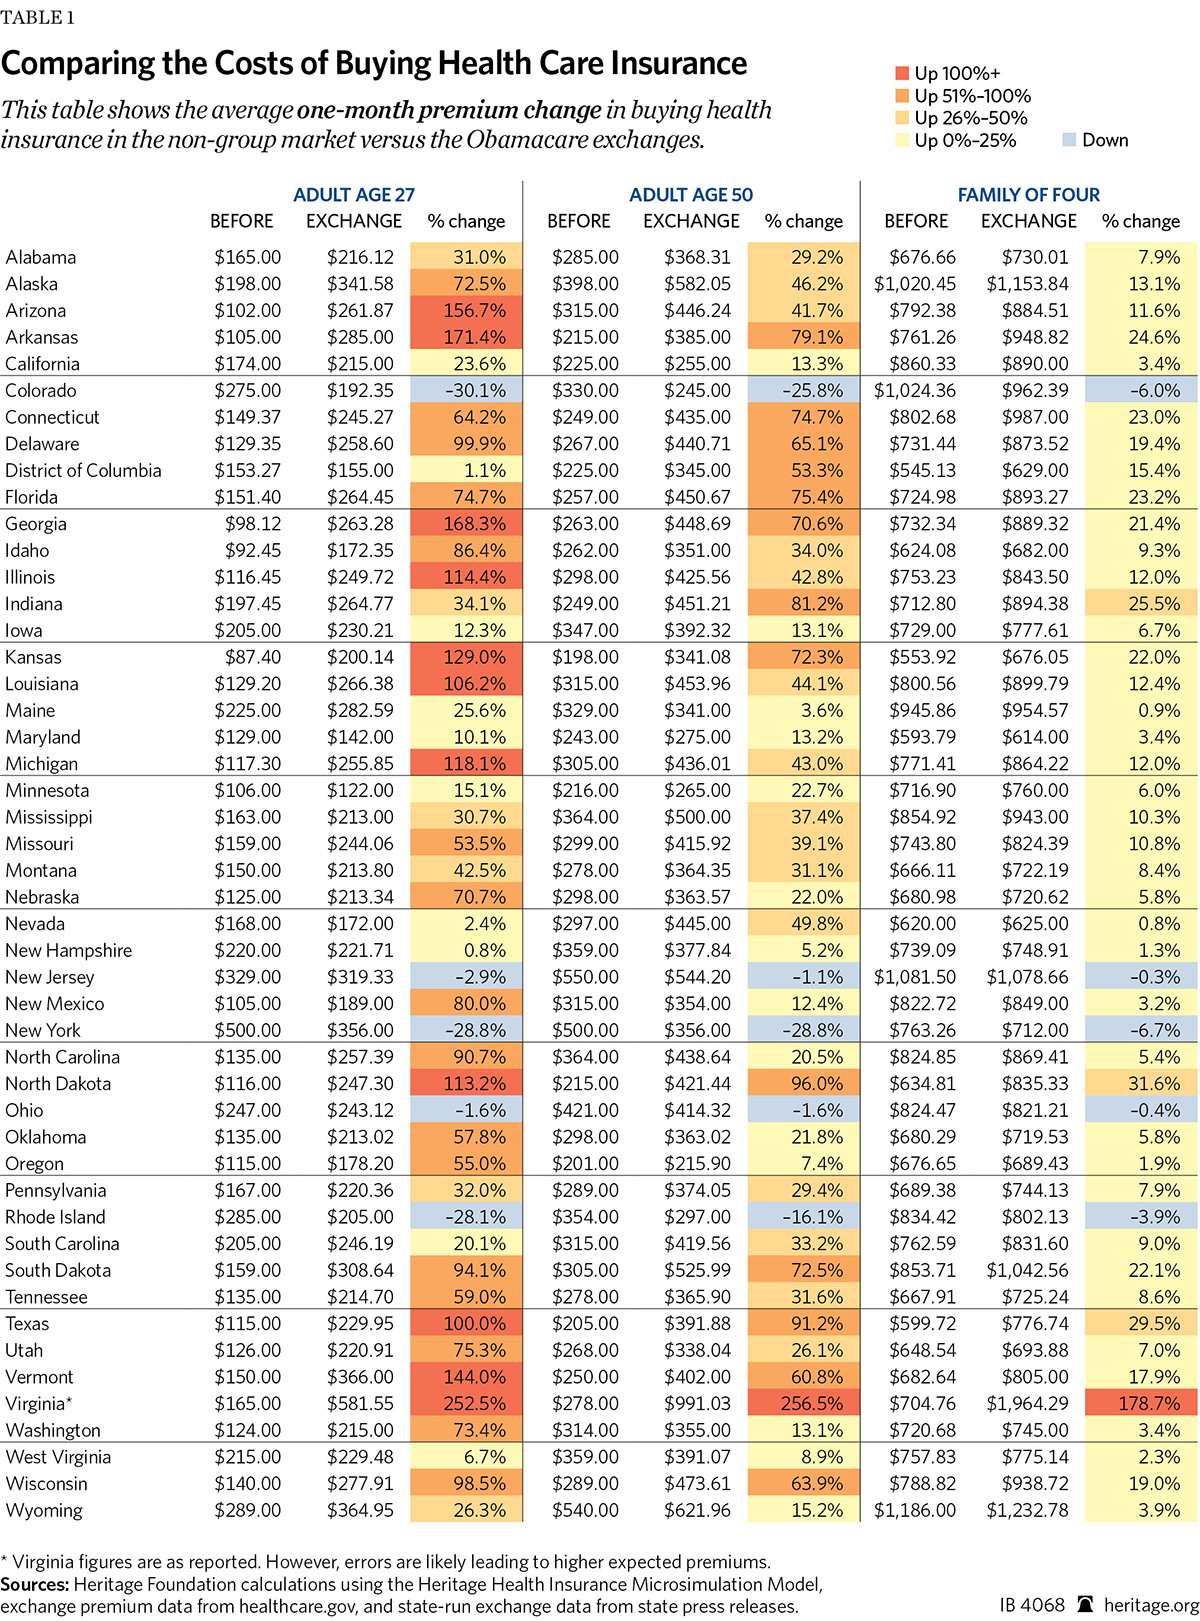 Cost of buying health insurance before and after Obamacare